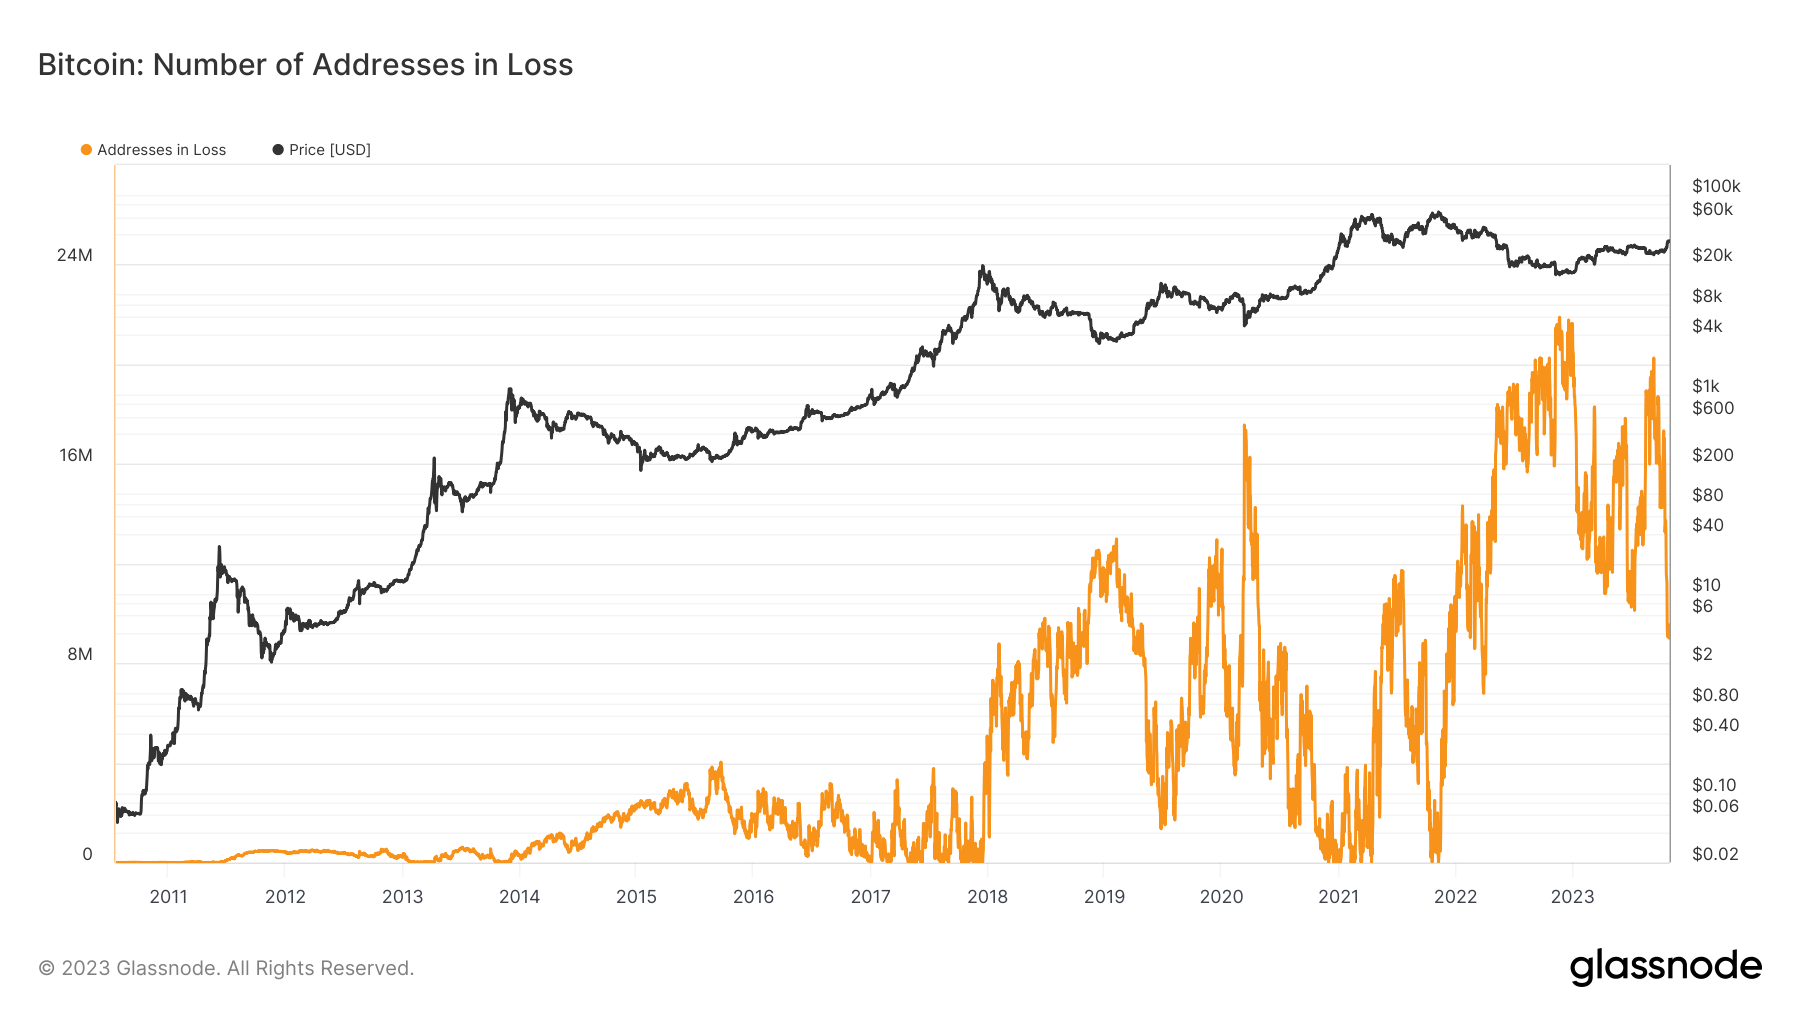 Bitcoin addresses in loss chart. Source: Glassnode